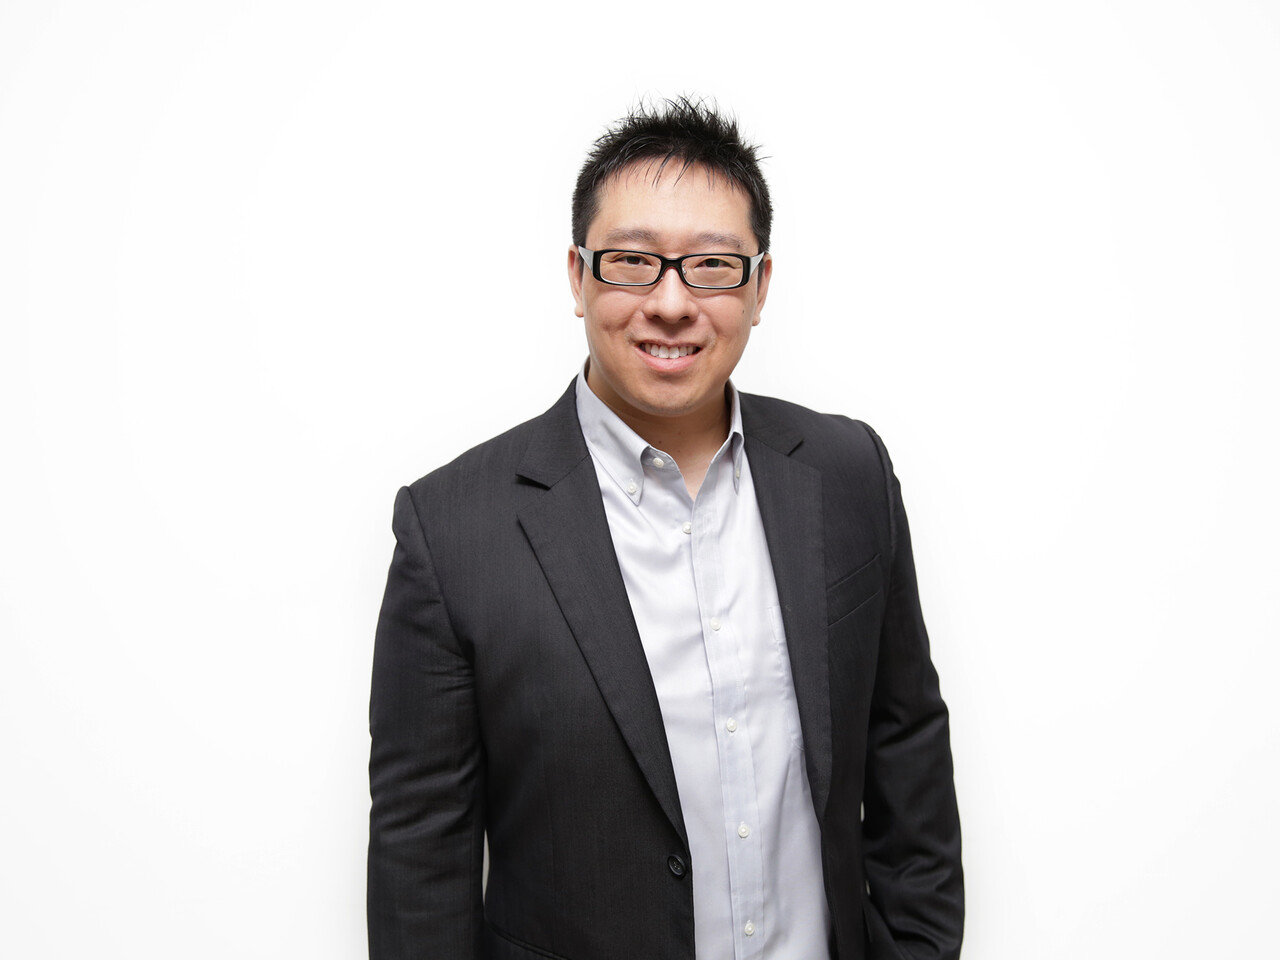 Samson Mow, founder of Bitcoin infrastructure and development firm JAN3. Photo provided by JAN3.